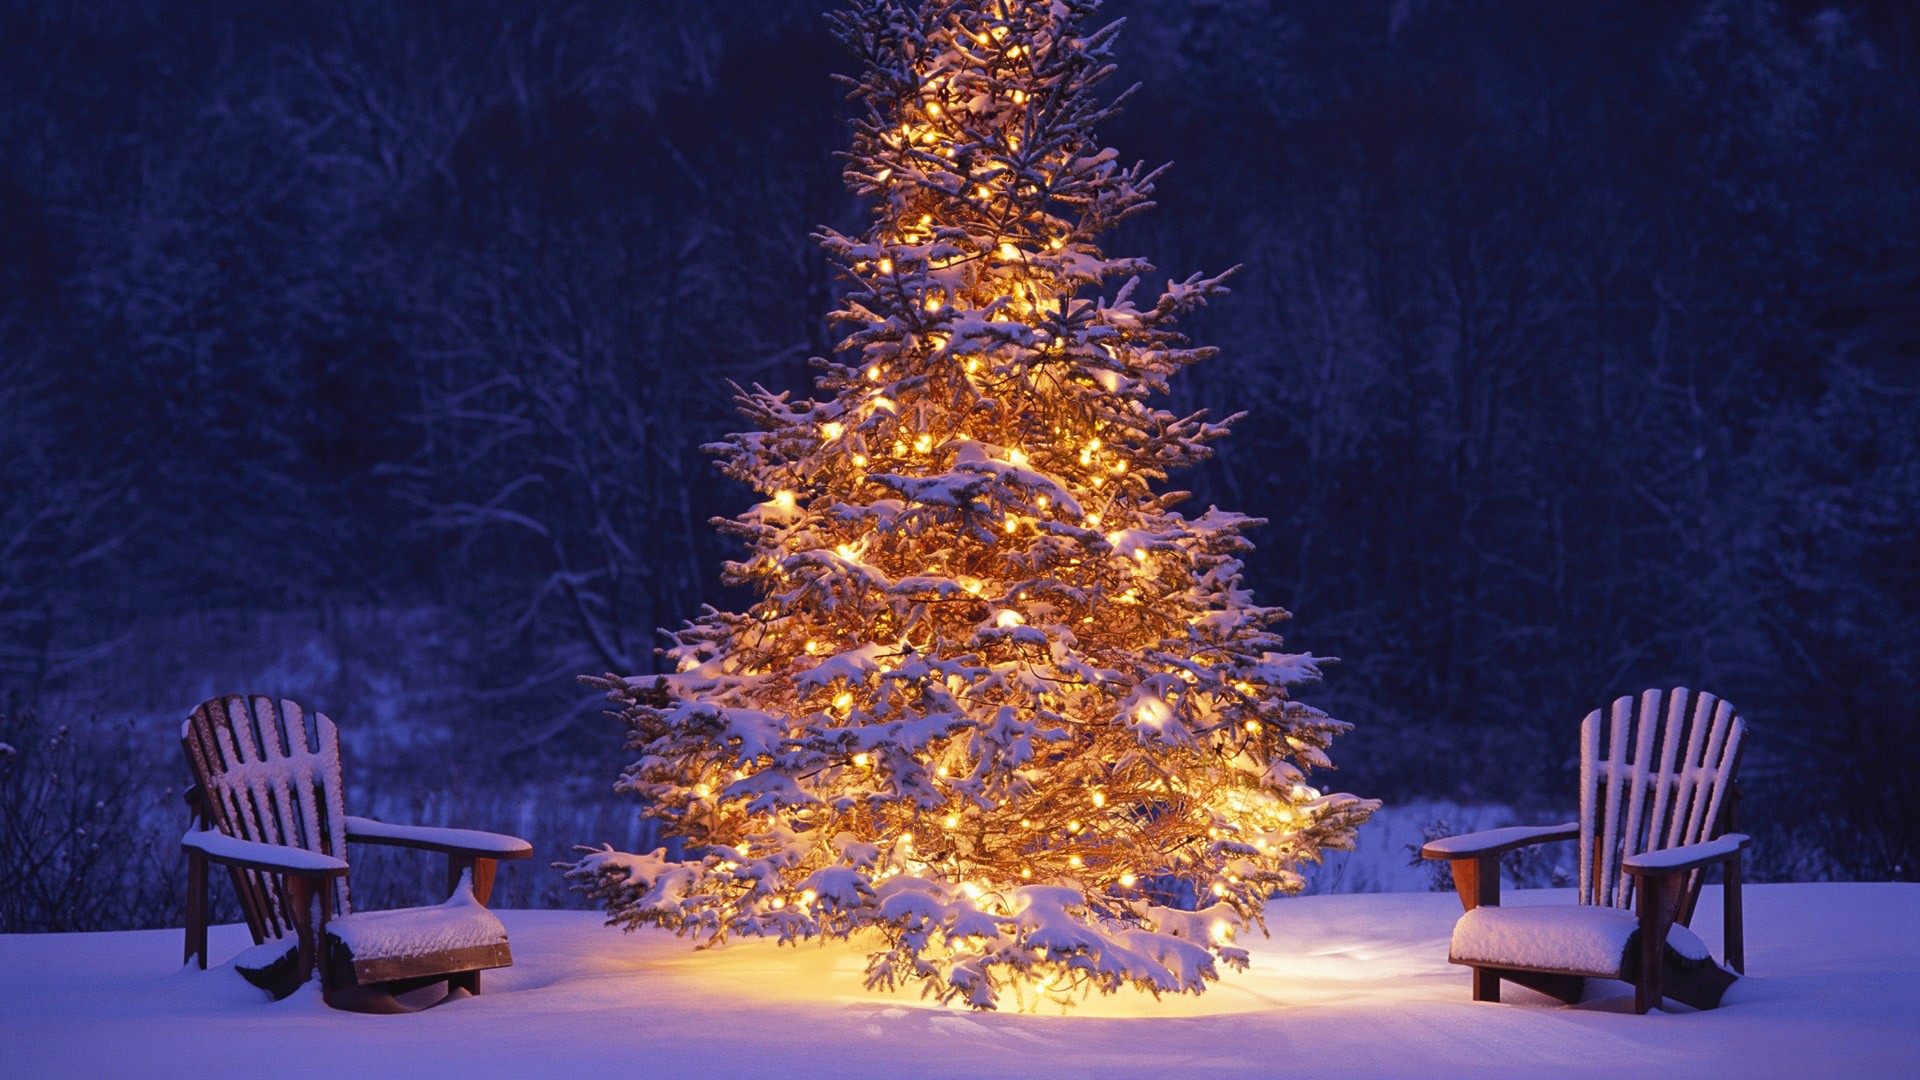 2015 hd Christmas background - wallpapers, images, photos ...